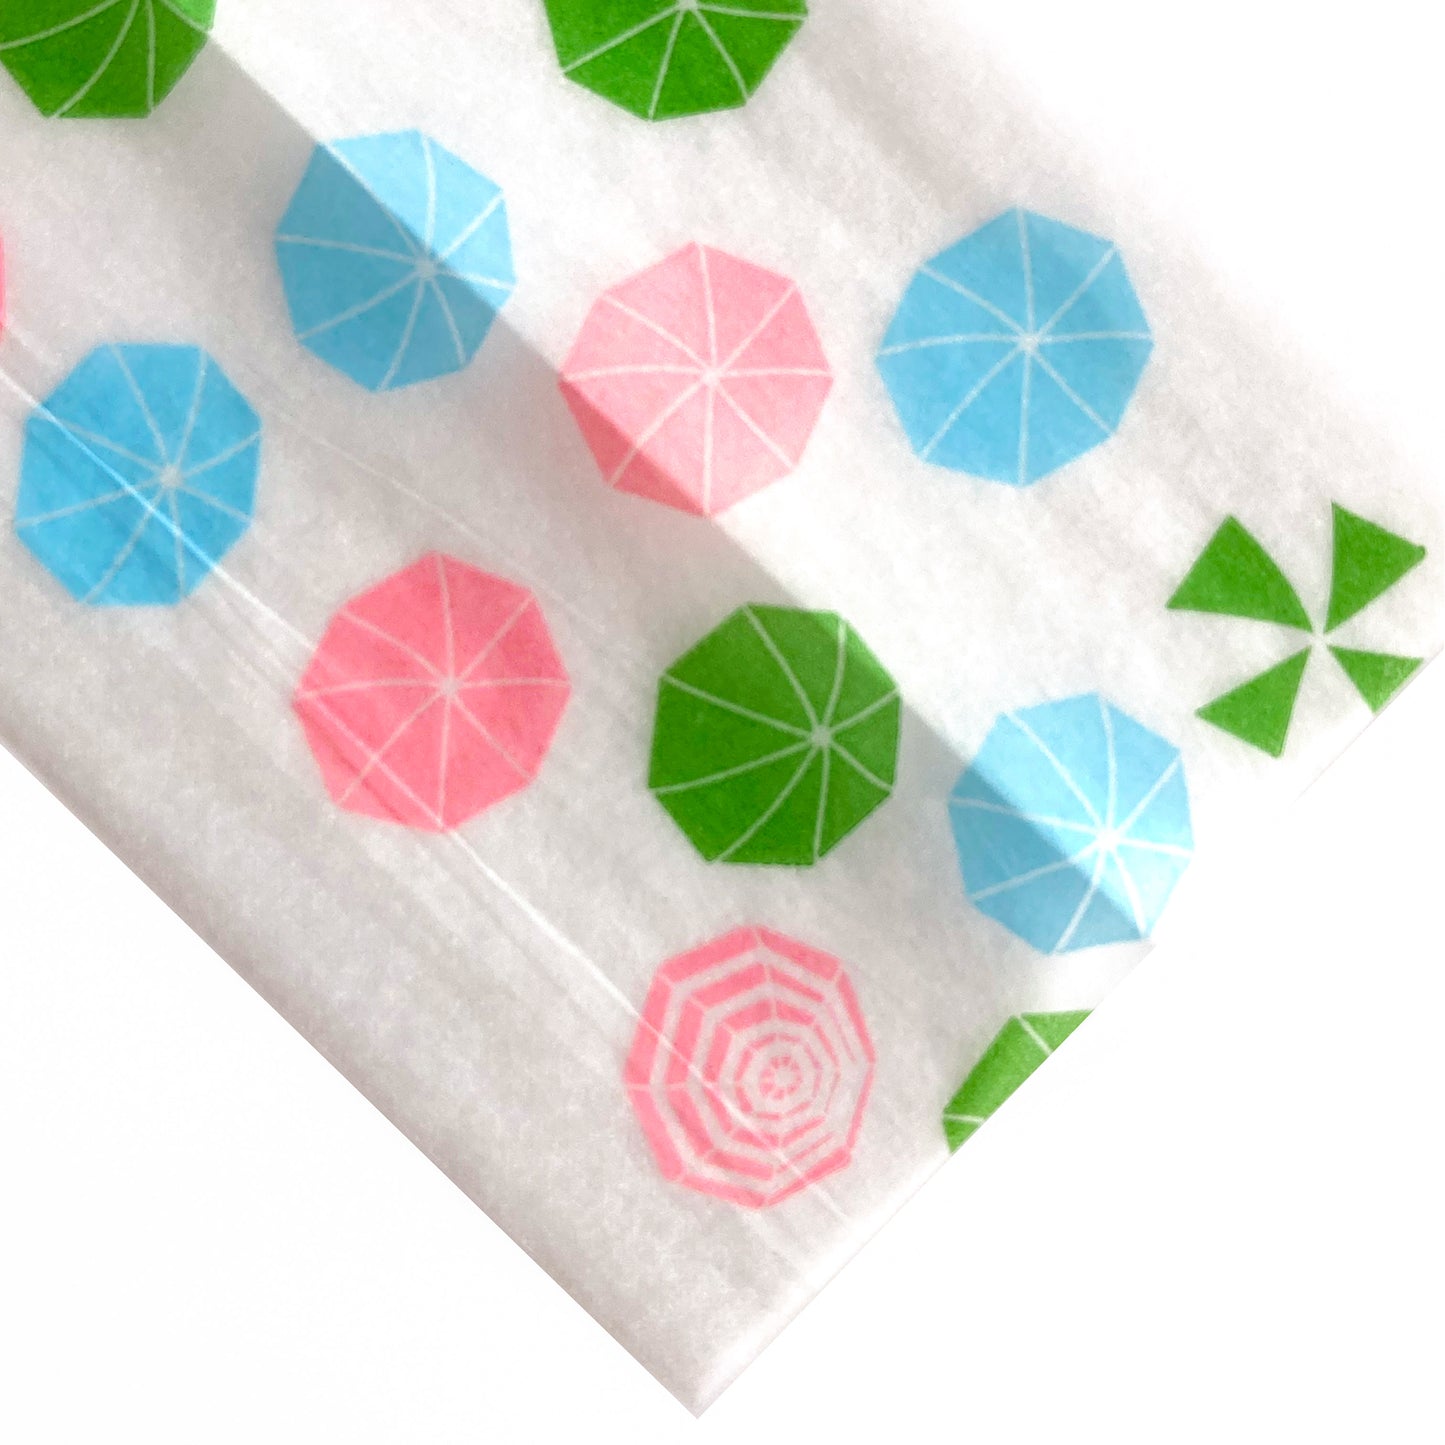 Boardwalk papers, set of 10: The Boardwalk Papers: sun umbrella, parasol, beachy rolling papers. These designer rolling papers are girly, pretty, vegan, cute, cool, standard size, high quality, even burn, natural dyes, best tasting, slow burn.